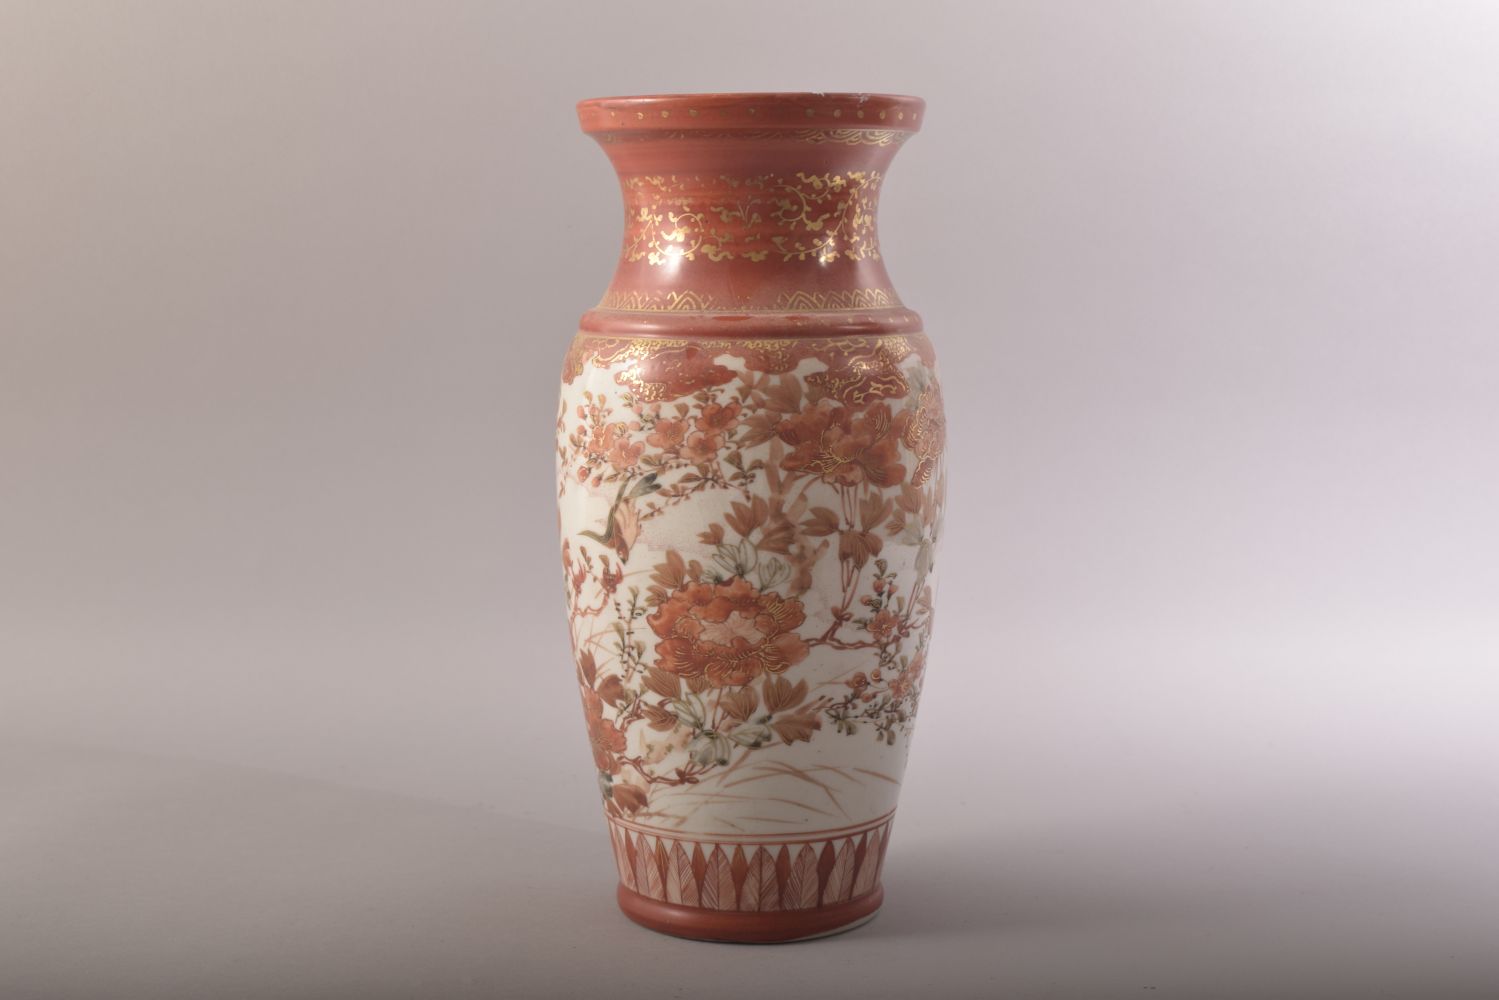 A JAPANESE KUTANI PORCELAIN VASE, painted with birds, native flora and gilt highlights, 30.5cm - Image 4 of 7